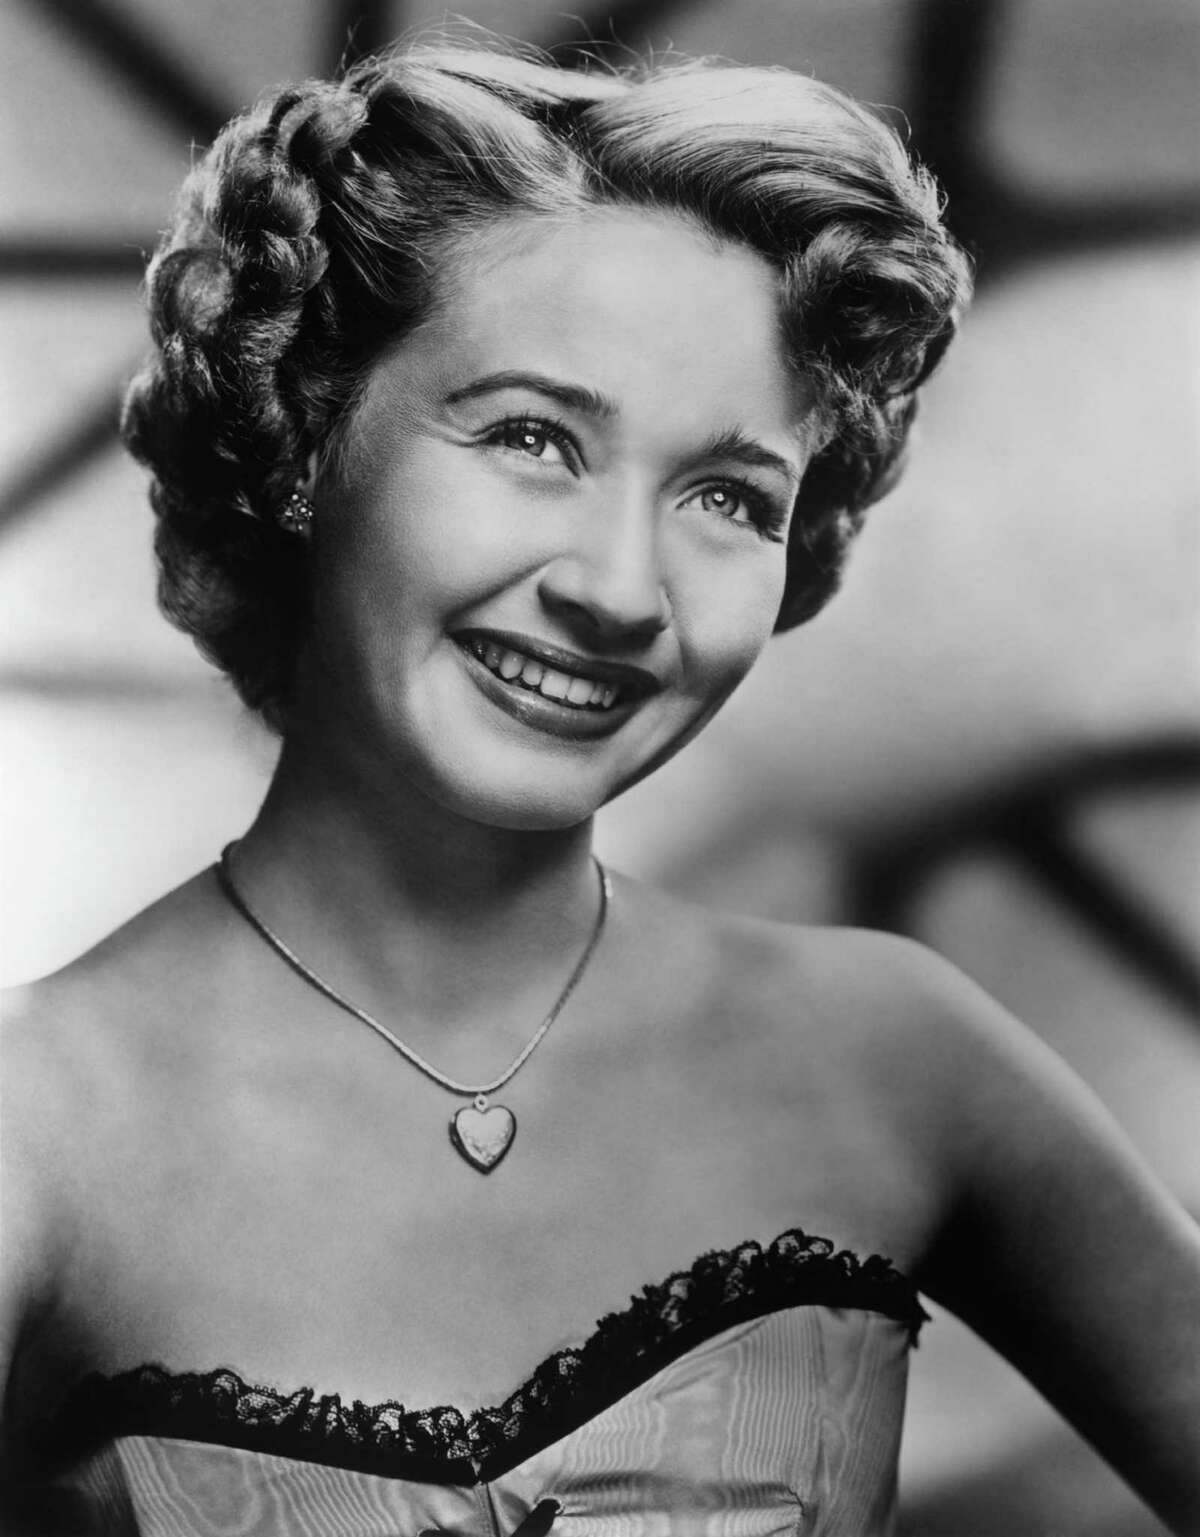 MGM star and longtime Fairfield County resident Jane Powell will do a question-and-answer session at the Ridgefield Playhouse after a screening of "Royal Wedding" on Oct. 21.